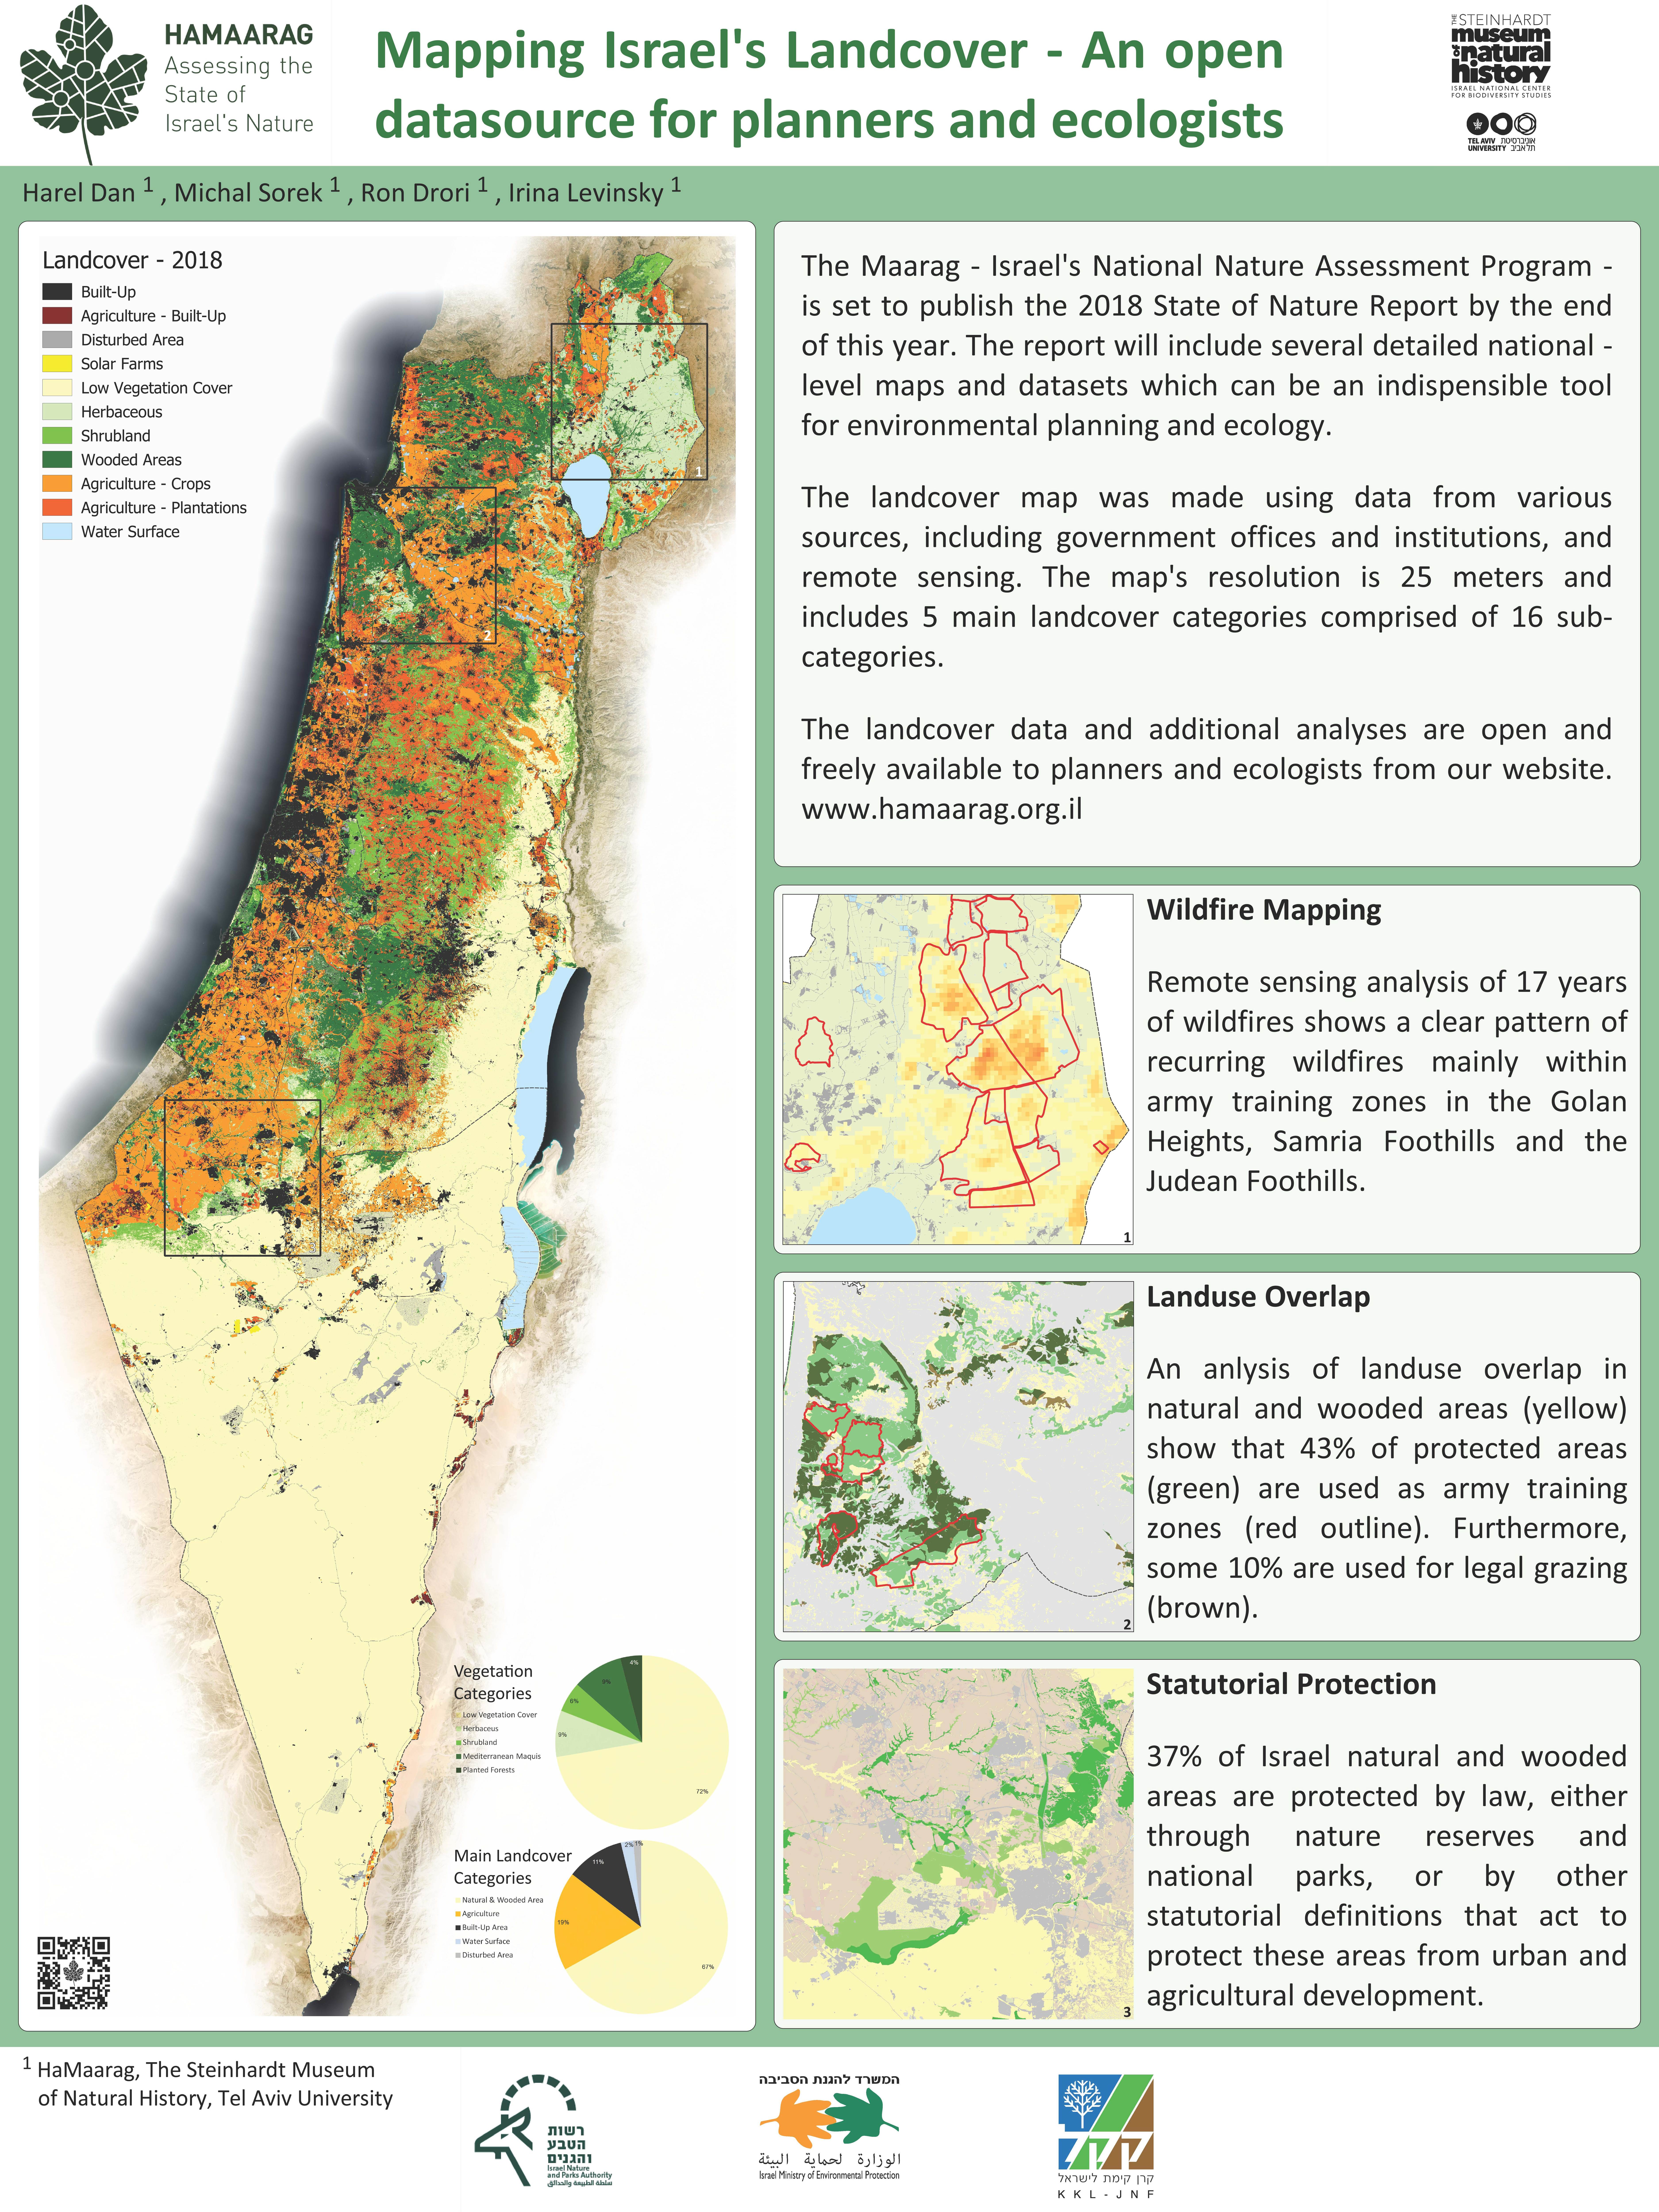 Poster Mapping Israel's Lancover - ISEES 2018